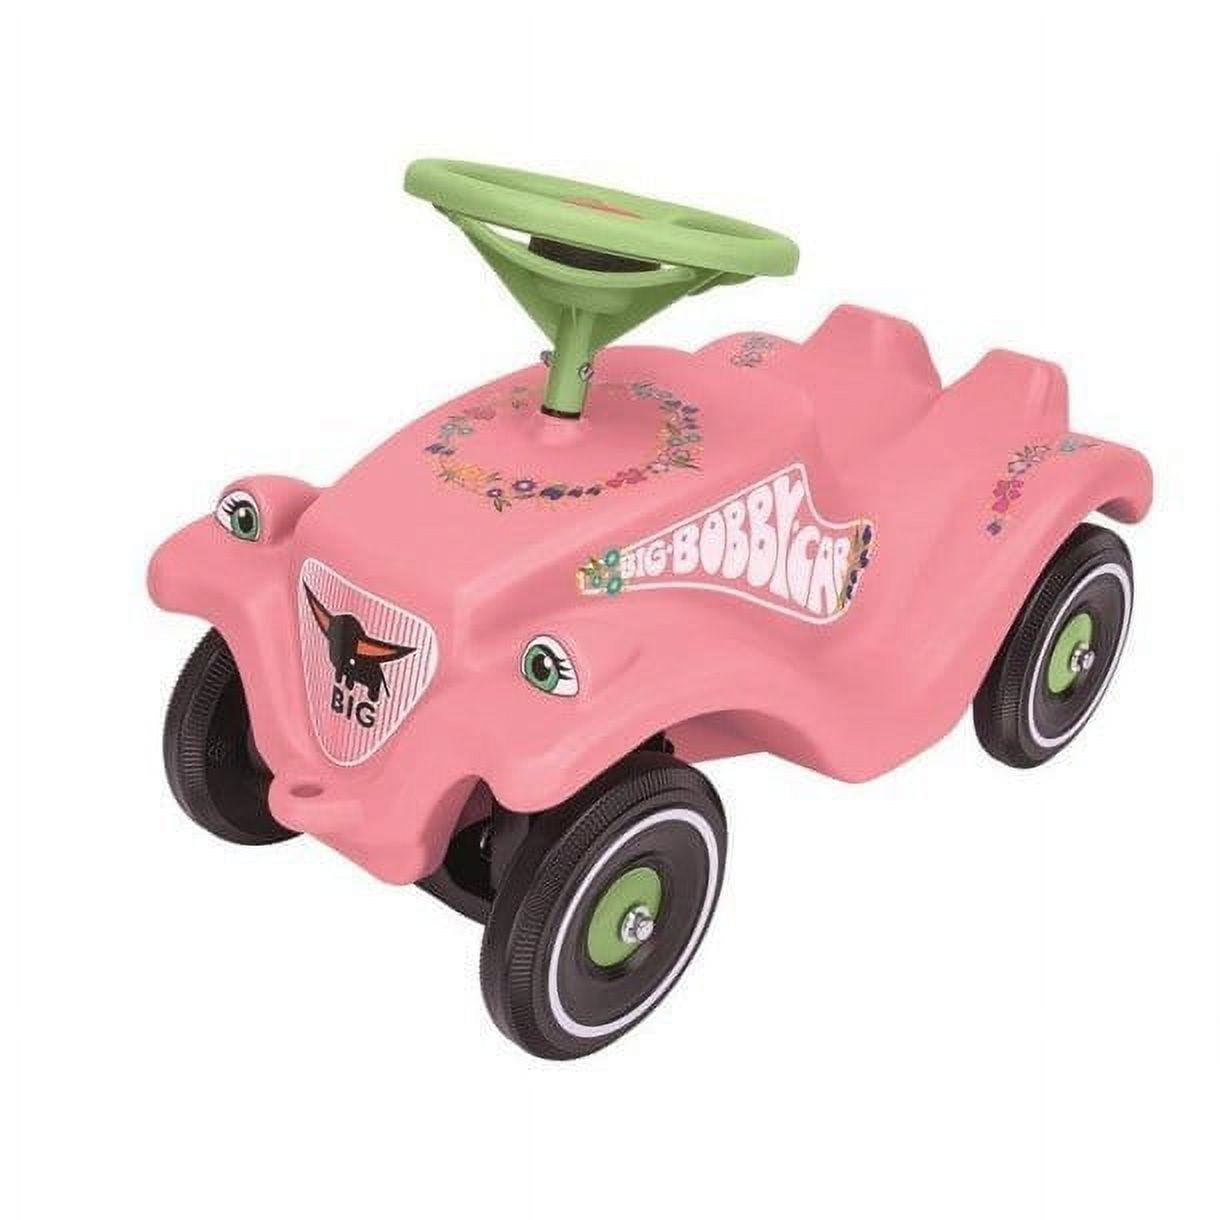 Big Bobby Car Classic Flower Ride-On – Pink